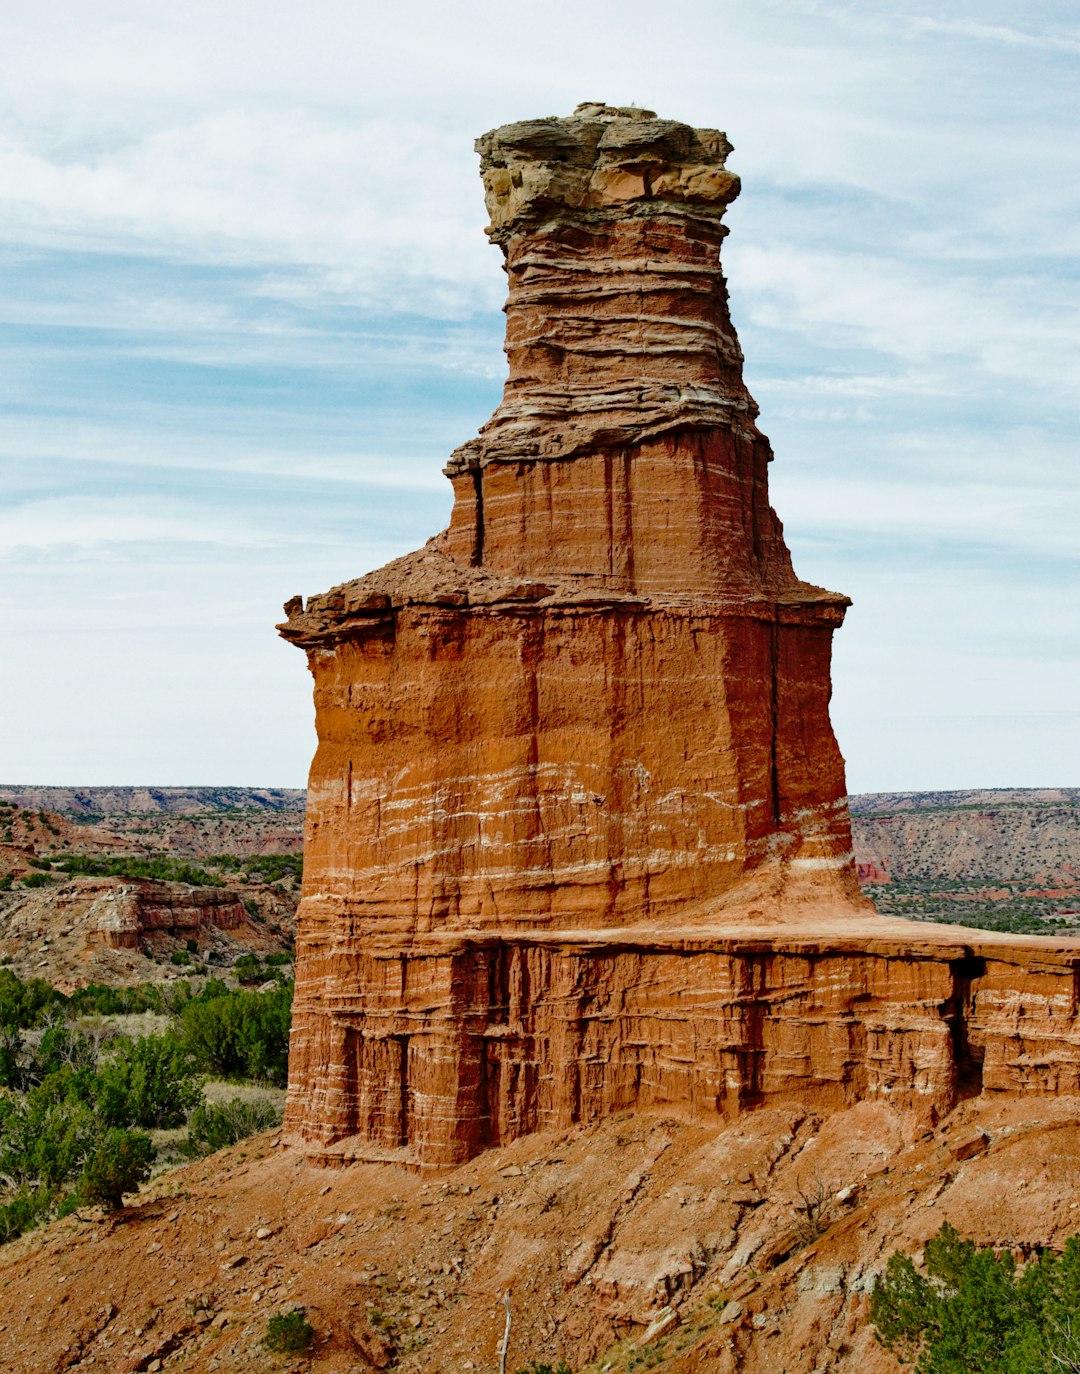 The Lighthouse formation at Palo Duro Canyon, Texas   

A few miles outside of Amarillo, Texas, 2015